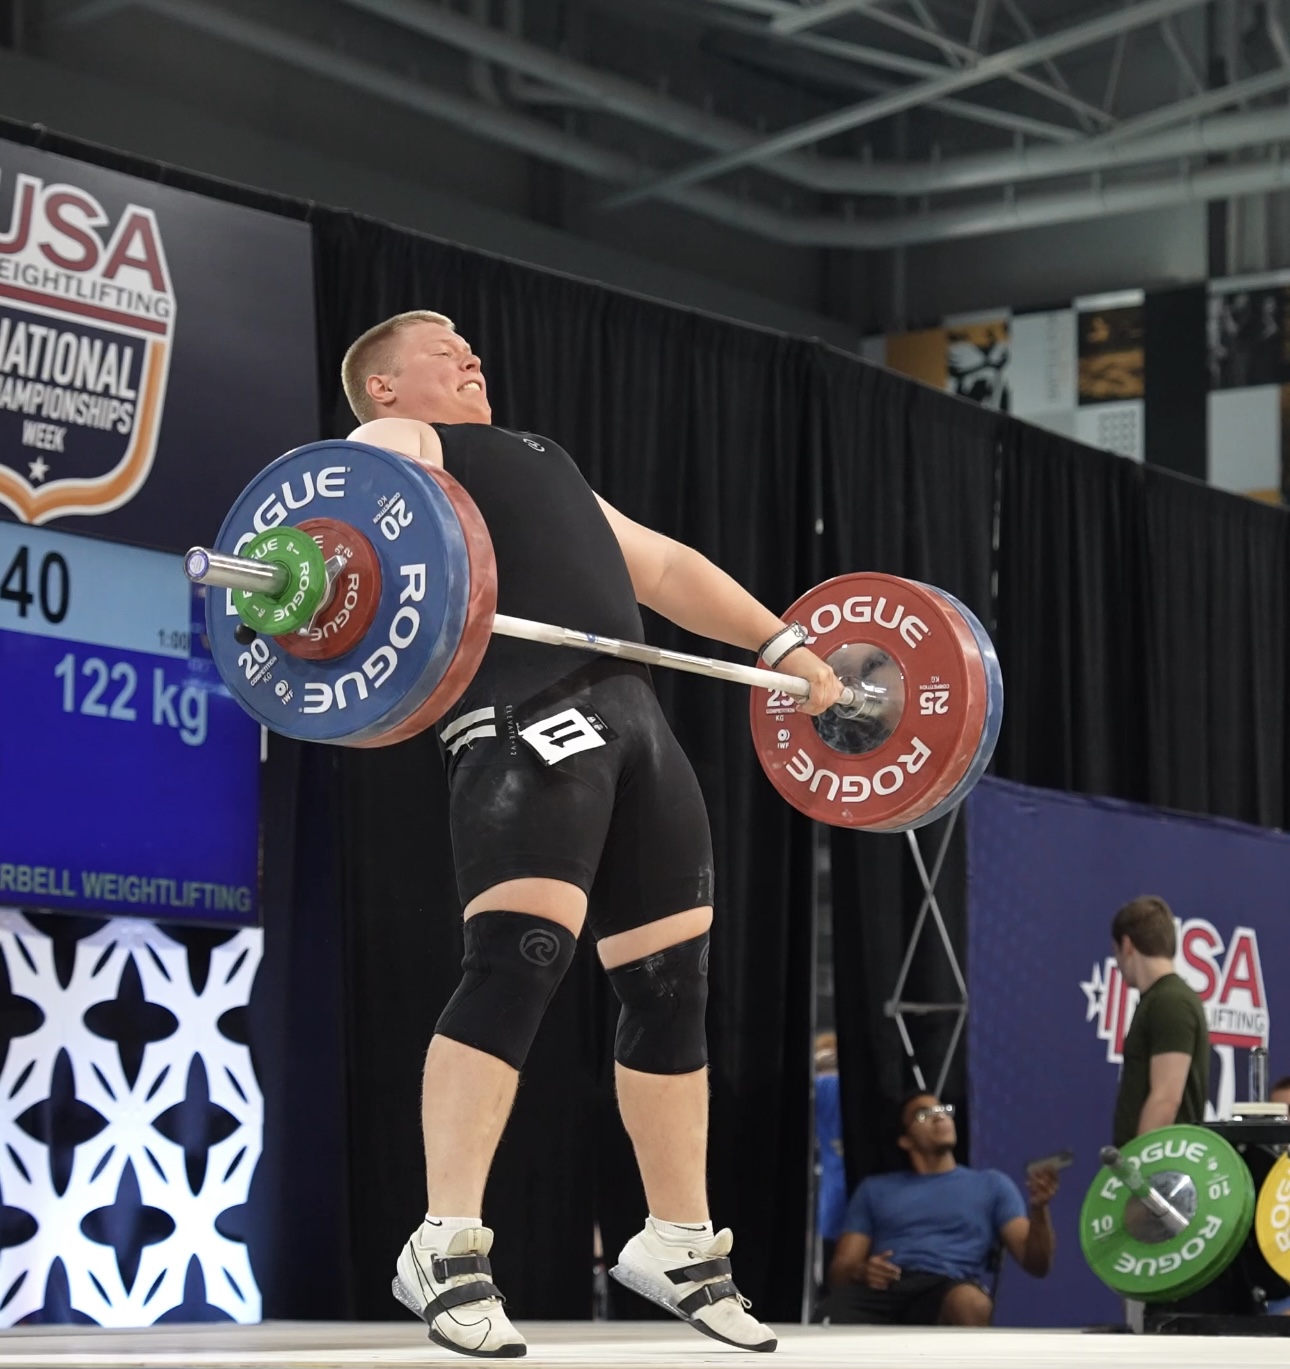 Adam Jarski competing in the junior national championship for weightlifting